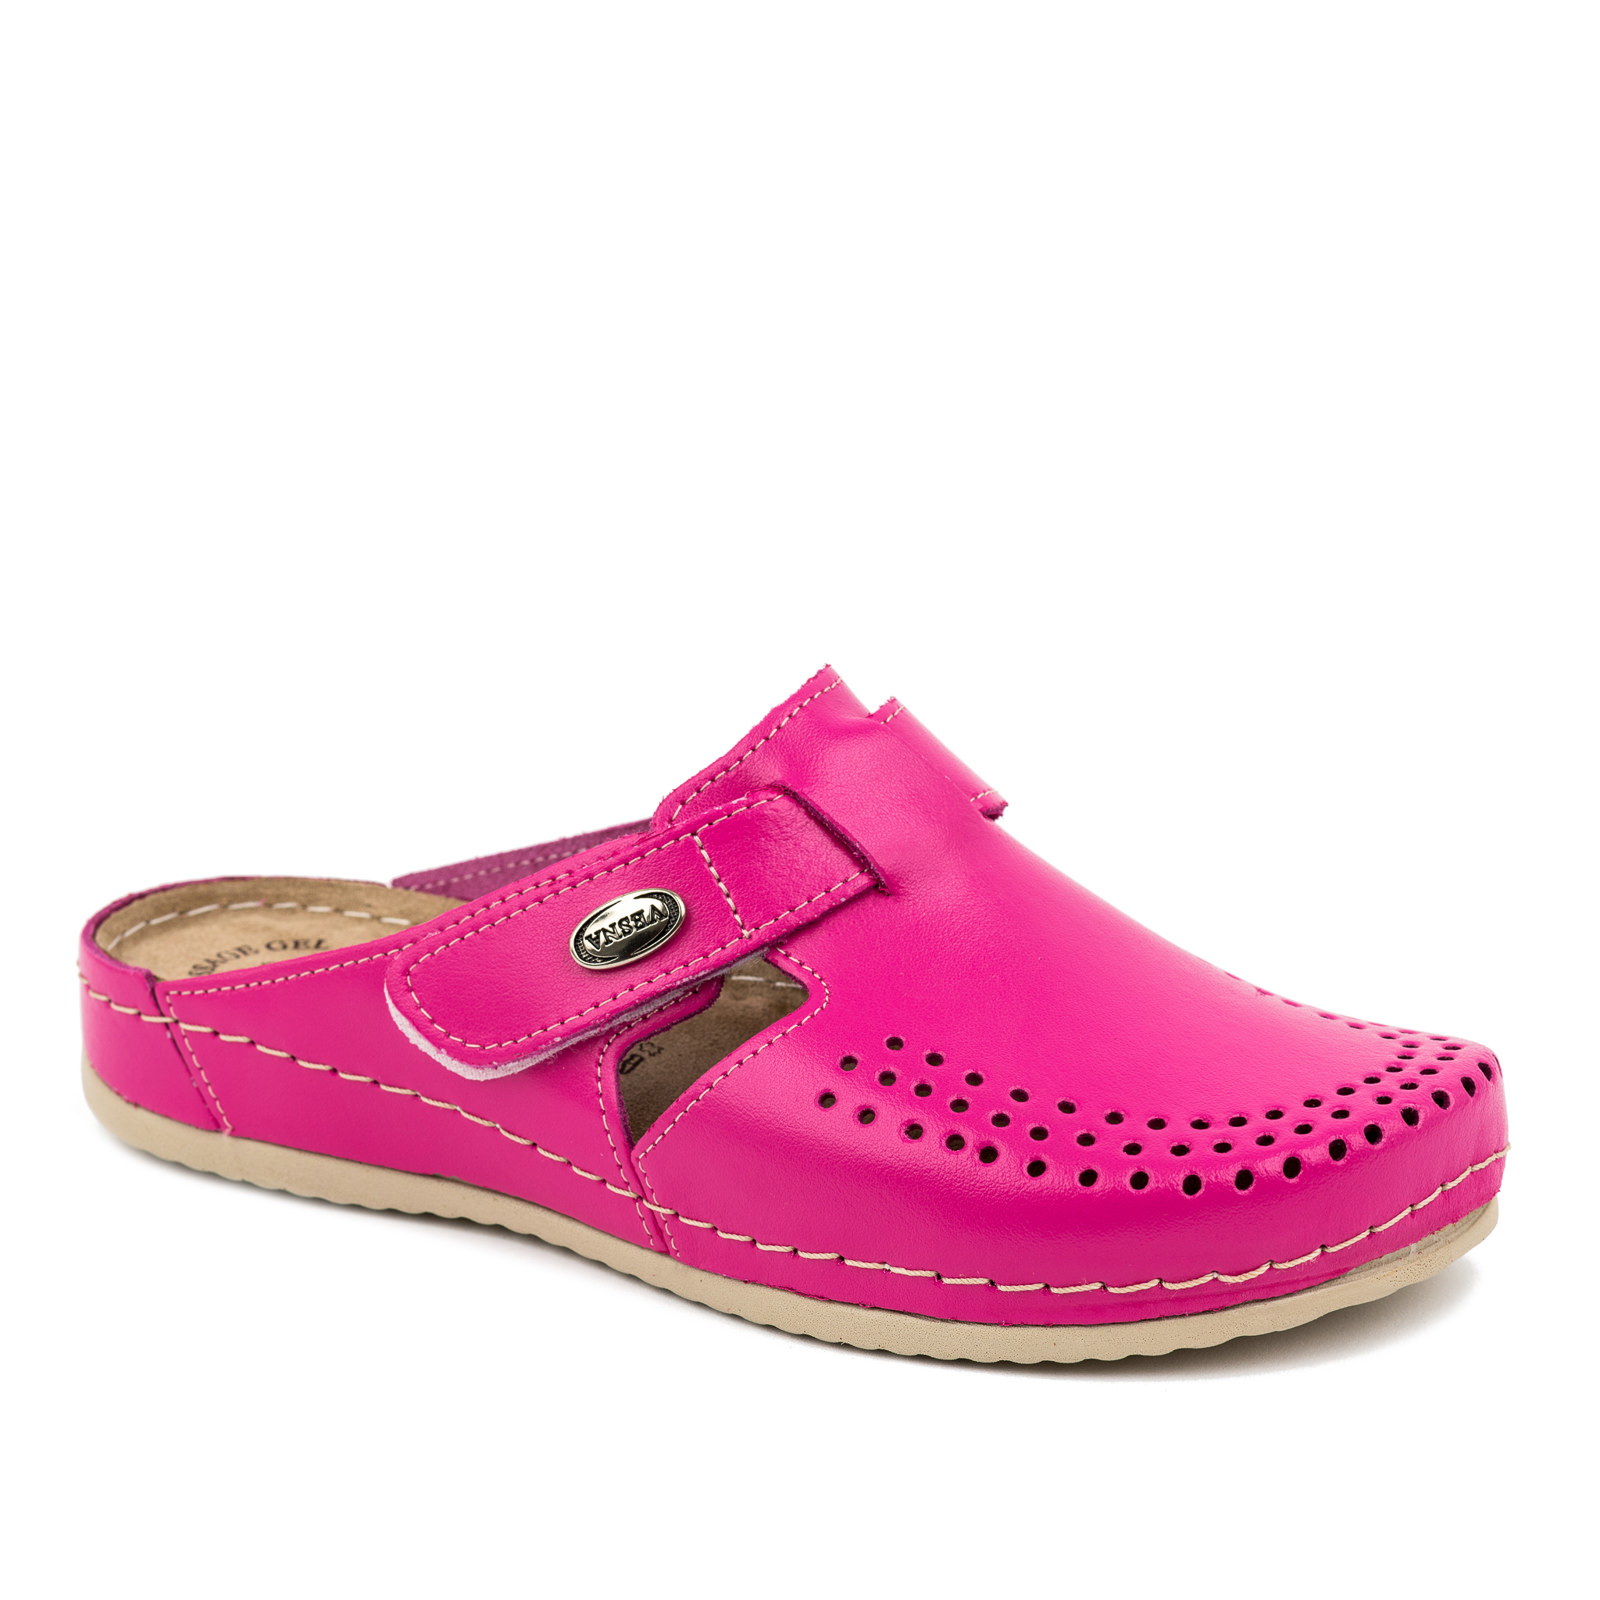 ANATOMIC LEATHER CLOGS WITH VELCRO BAND - PINK